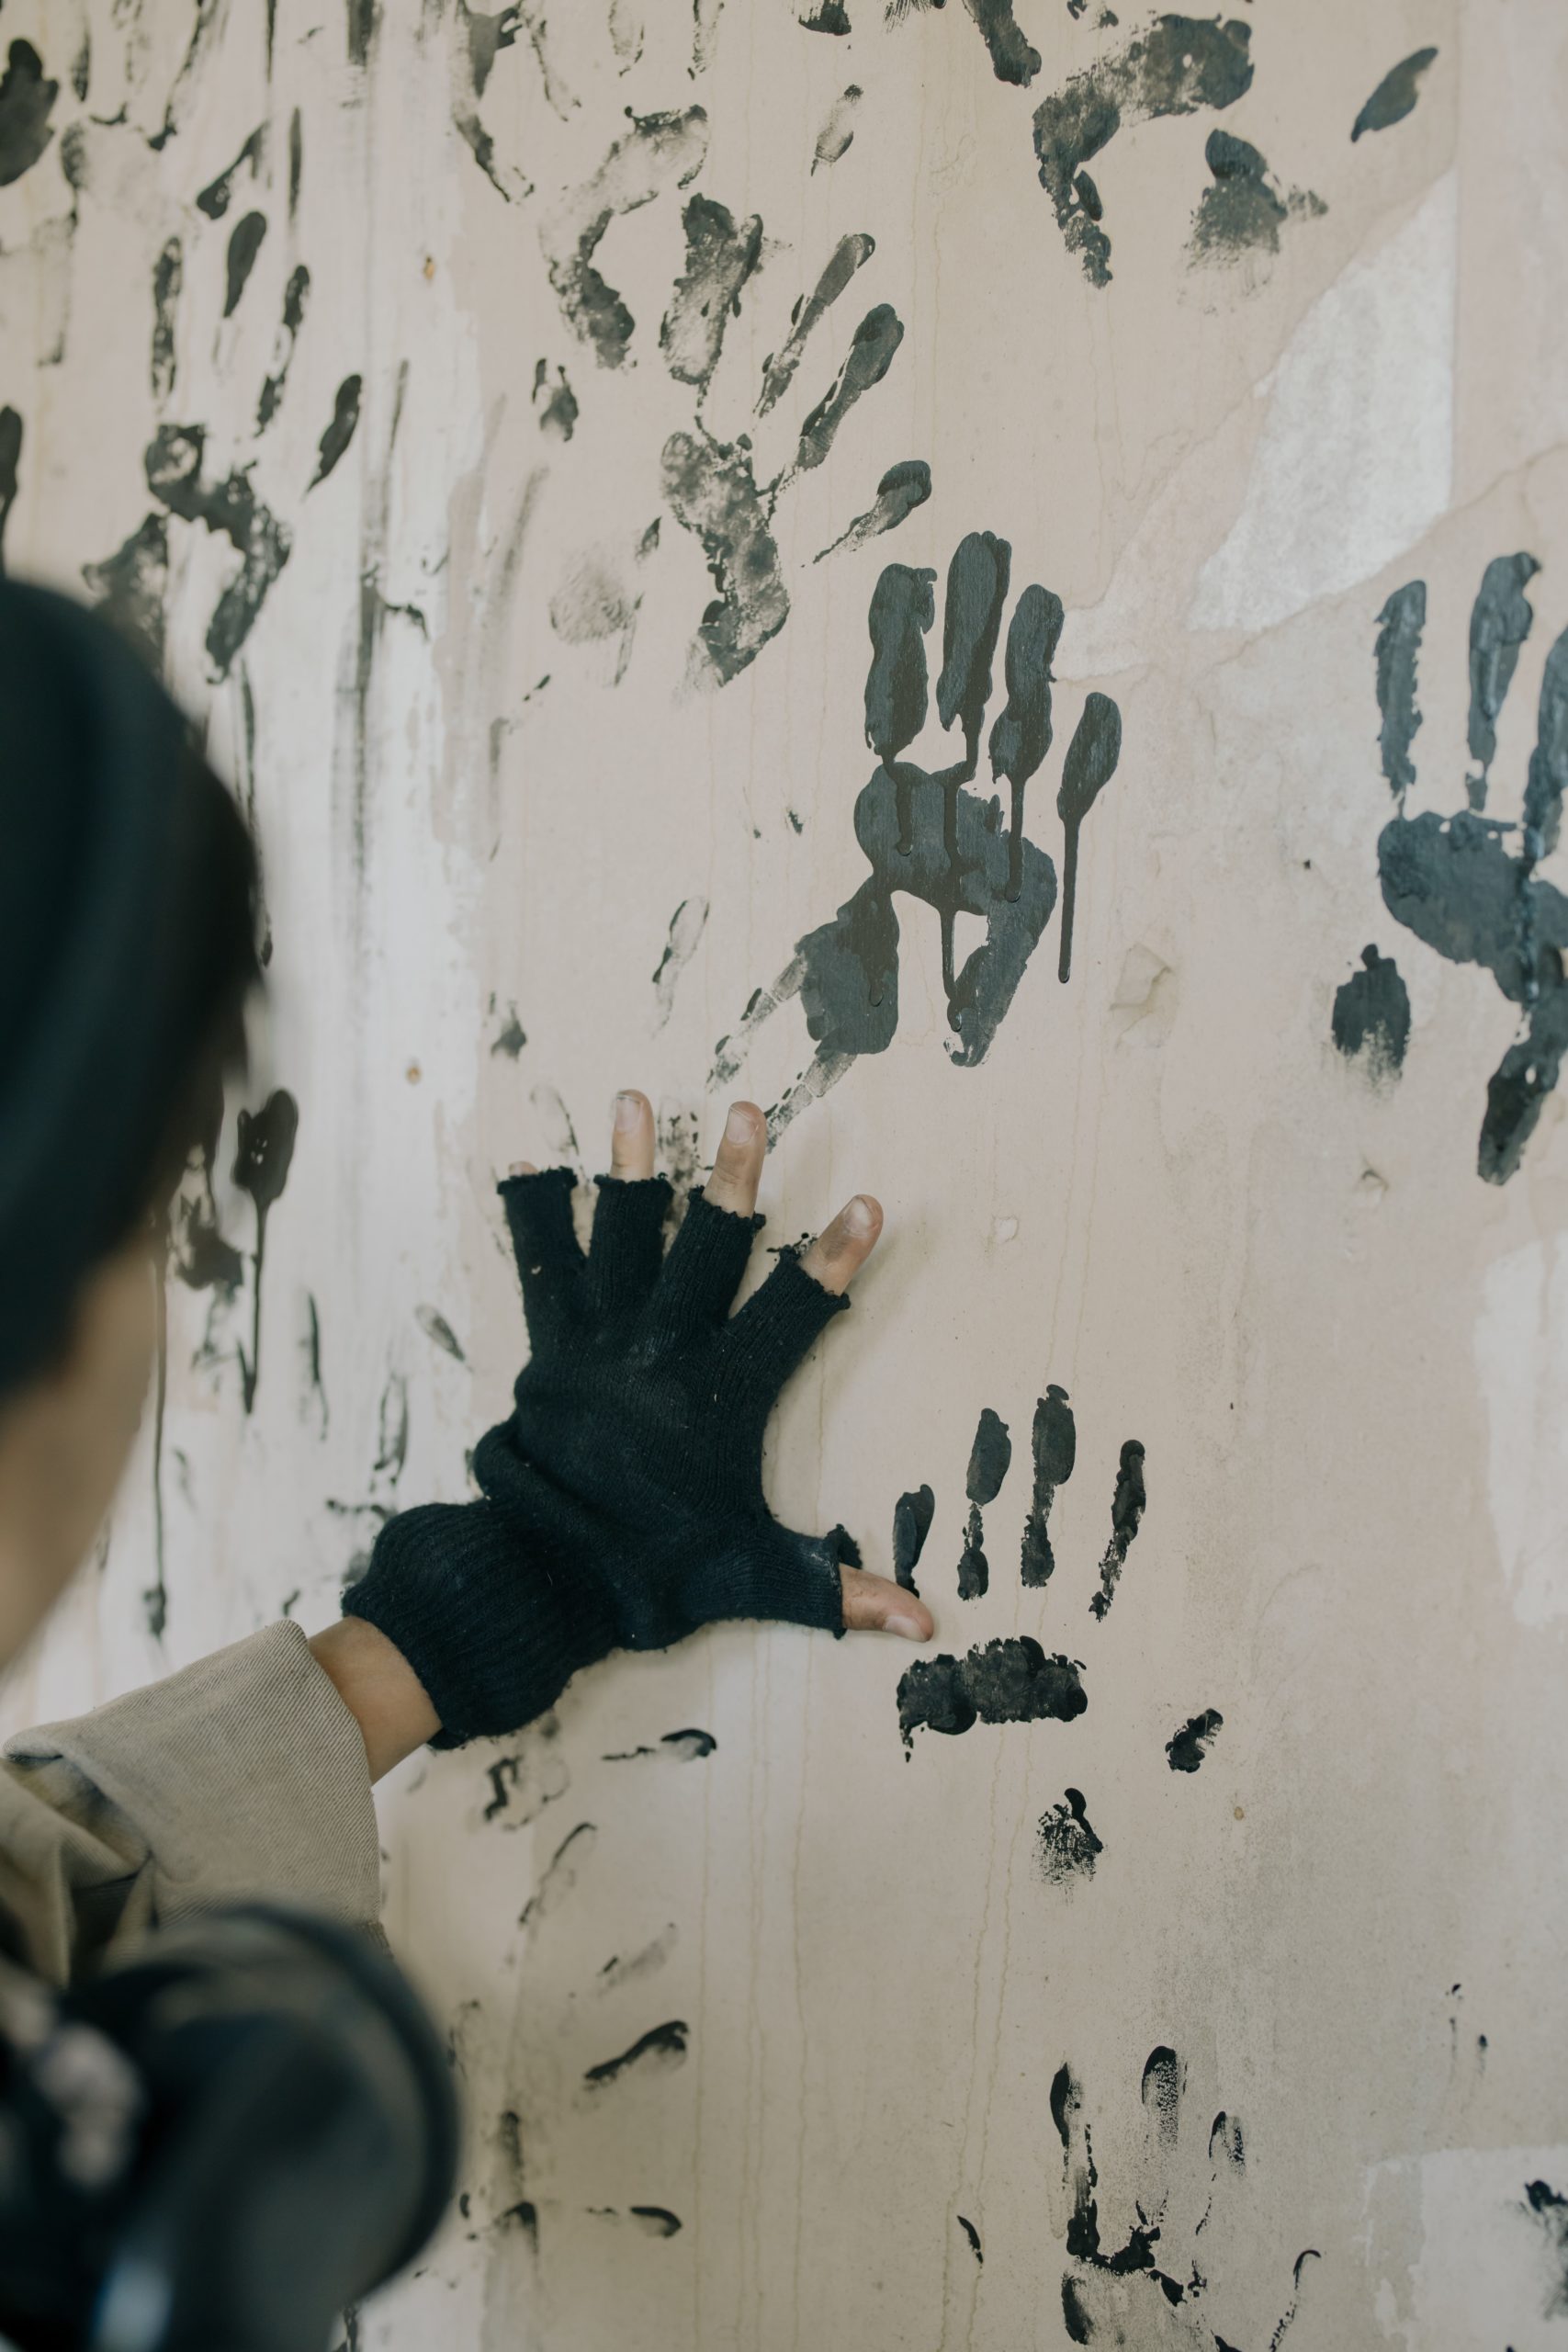 Woman in black gloves making handprints on a wall in black paint